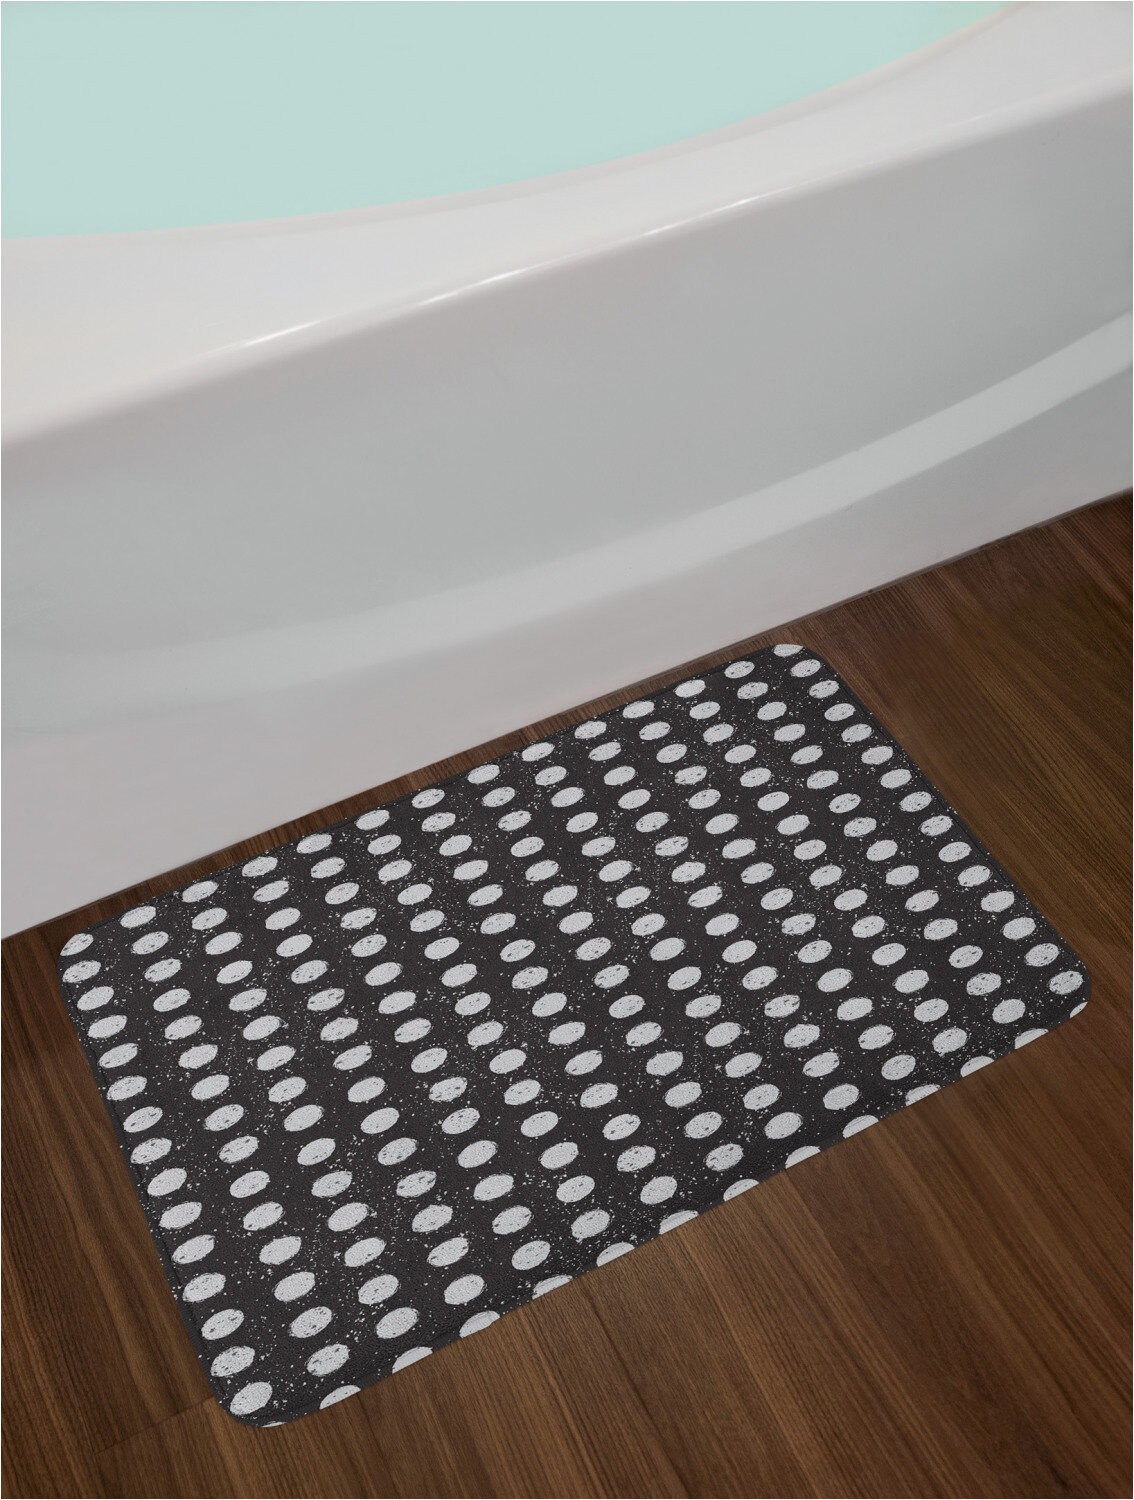 Unique Shaped Bath Rugs Monochrome Illustration Of Moon Shaped Circles In Grunge Bath Rug